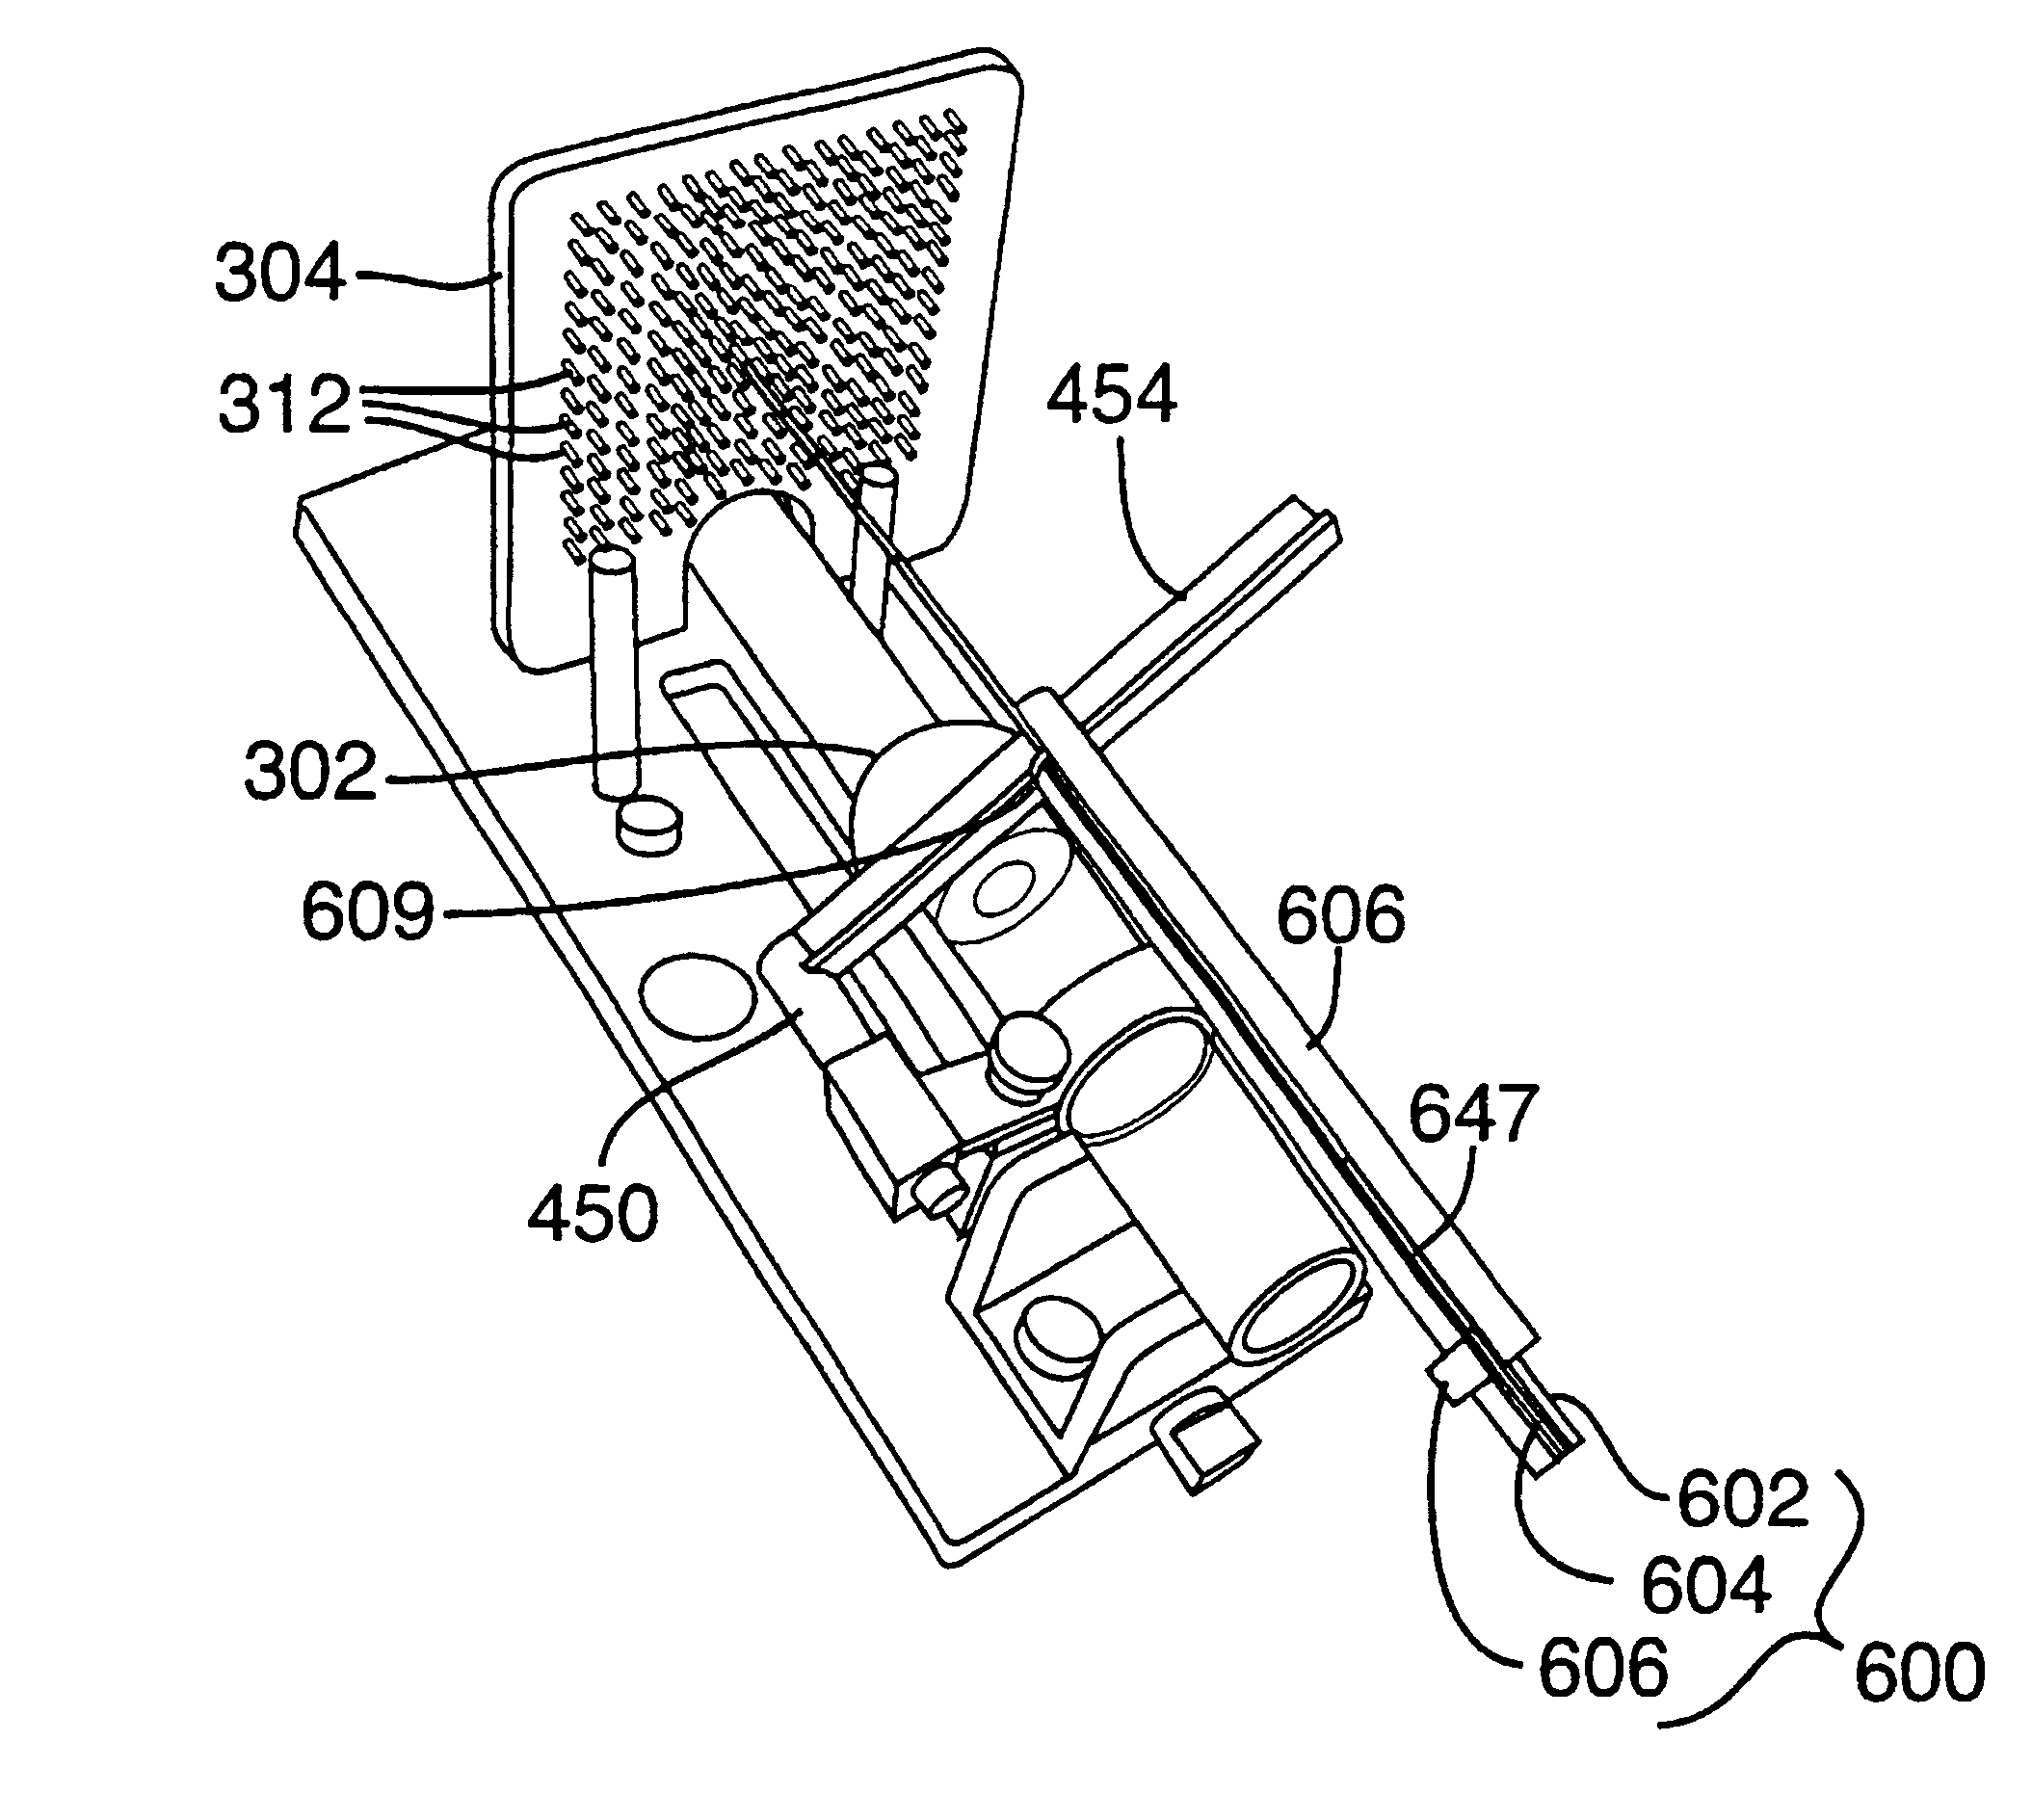 Brachytherapy instrument and methods